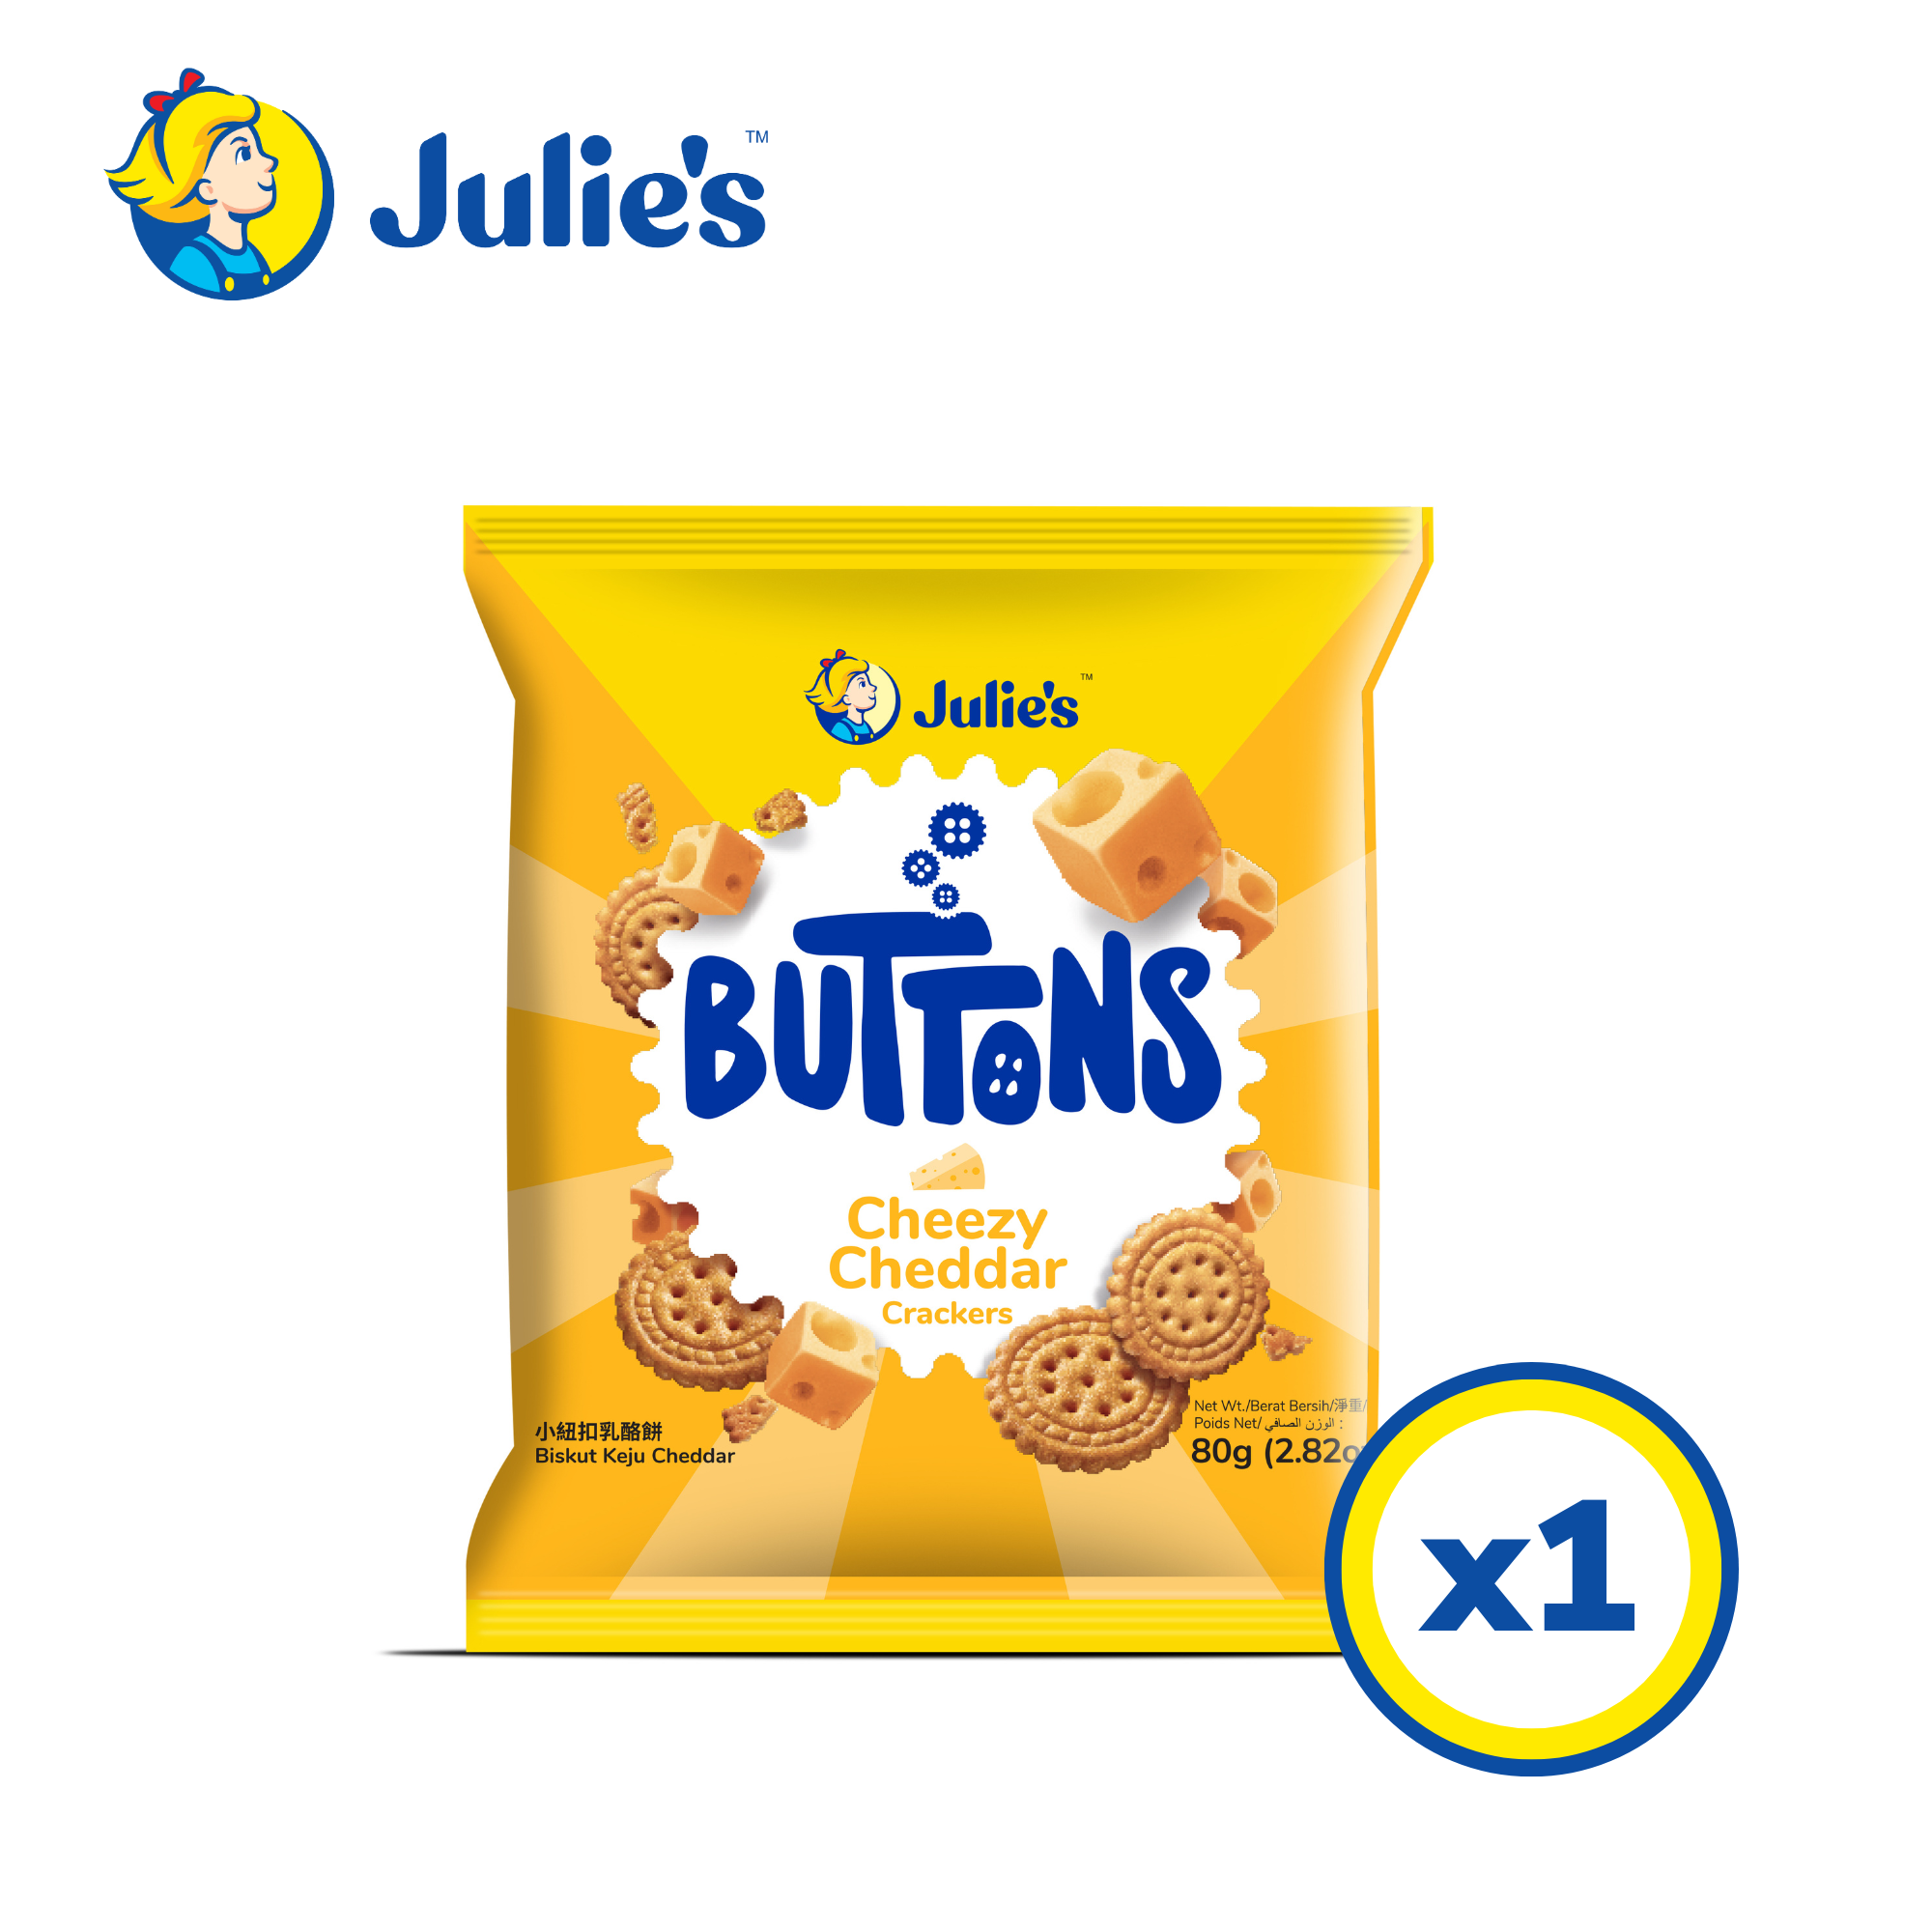 Julie’s Buttons Cheezy Cheddar Crackers 80g x 1 pack